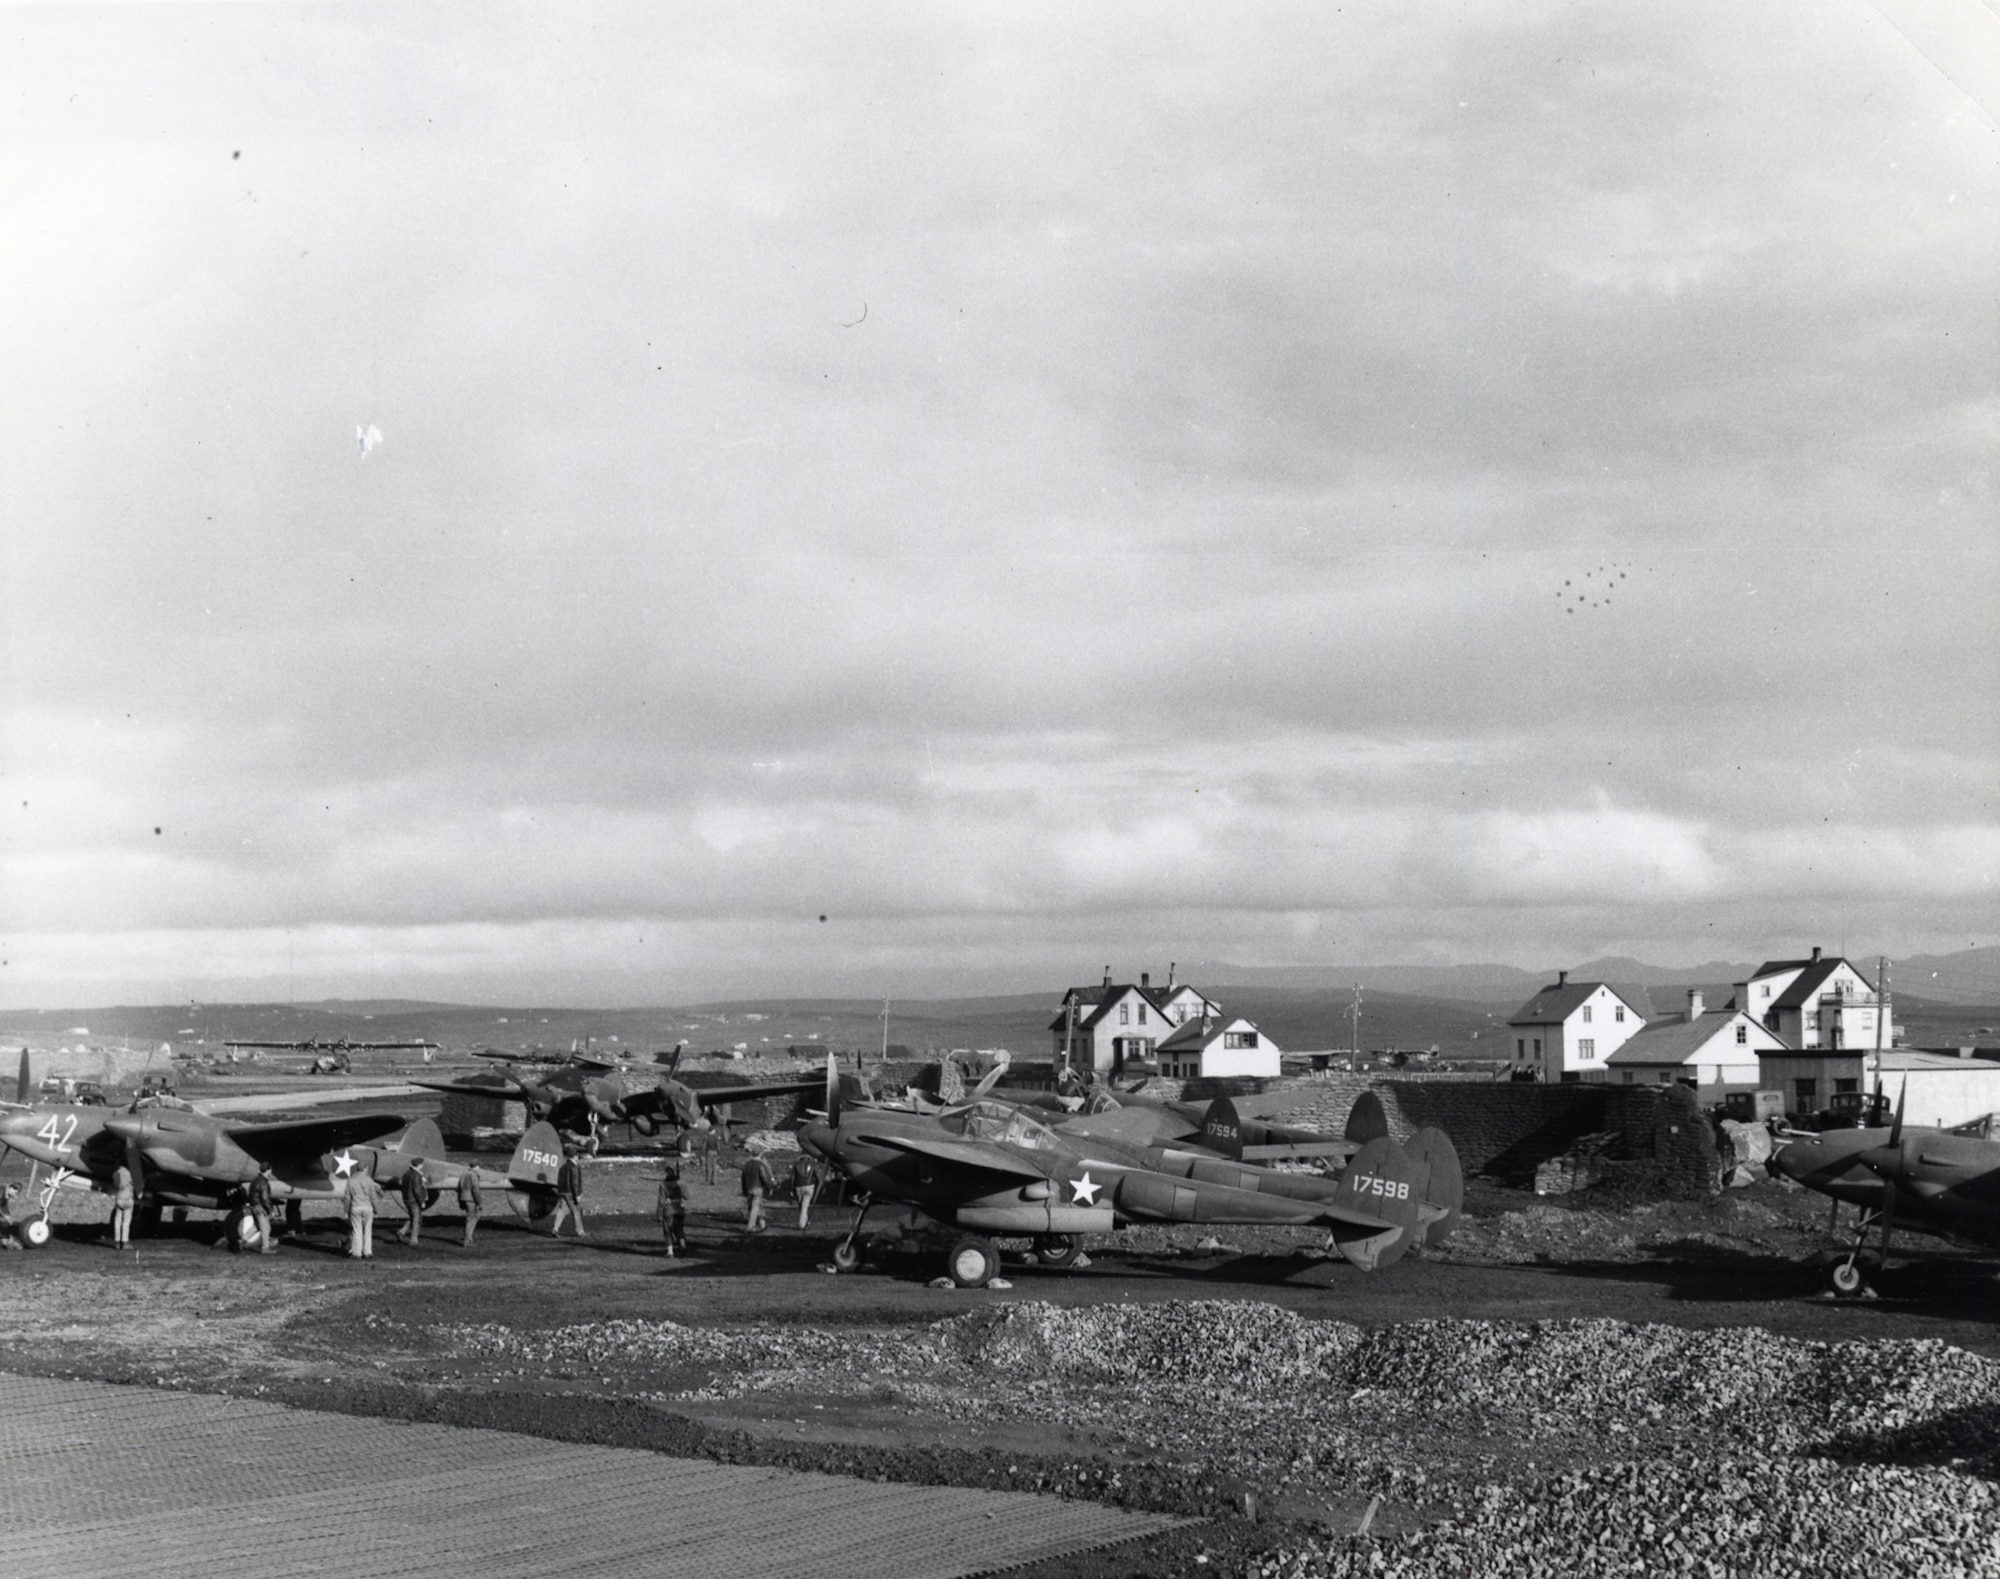 P-38s at refueling stop in Iceland on their way to England in the summer of 1942. (U.S. Air Force photo)